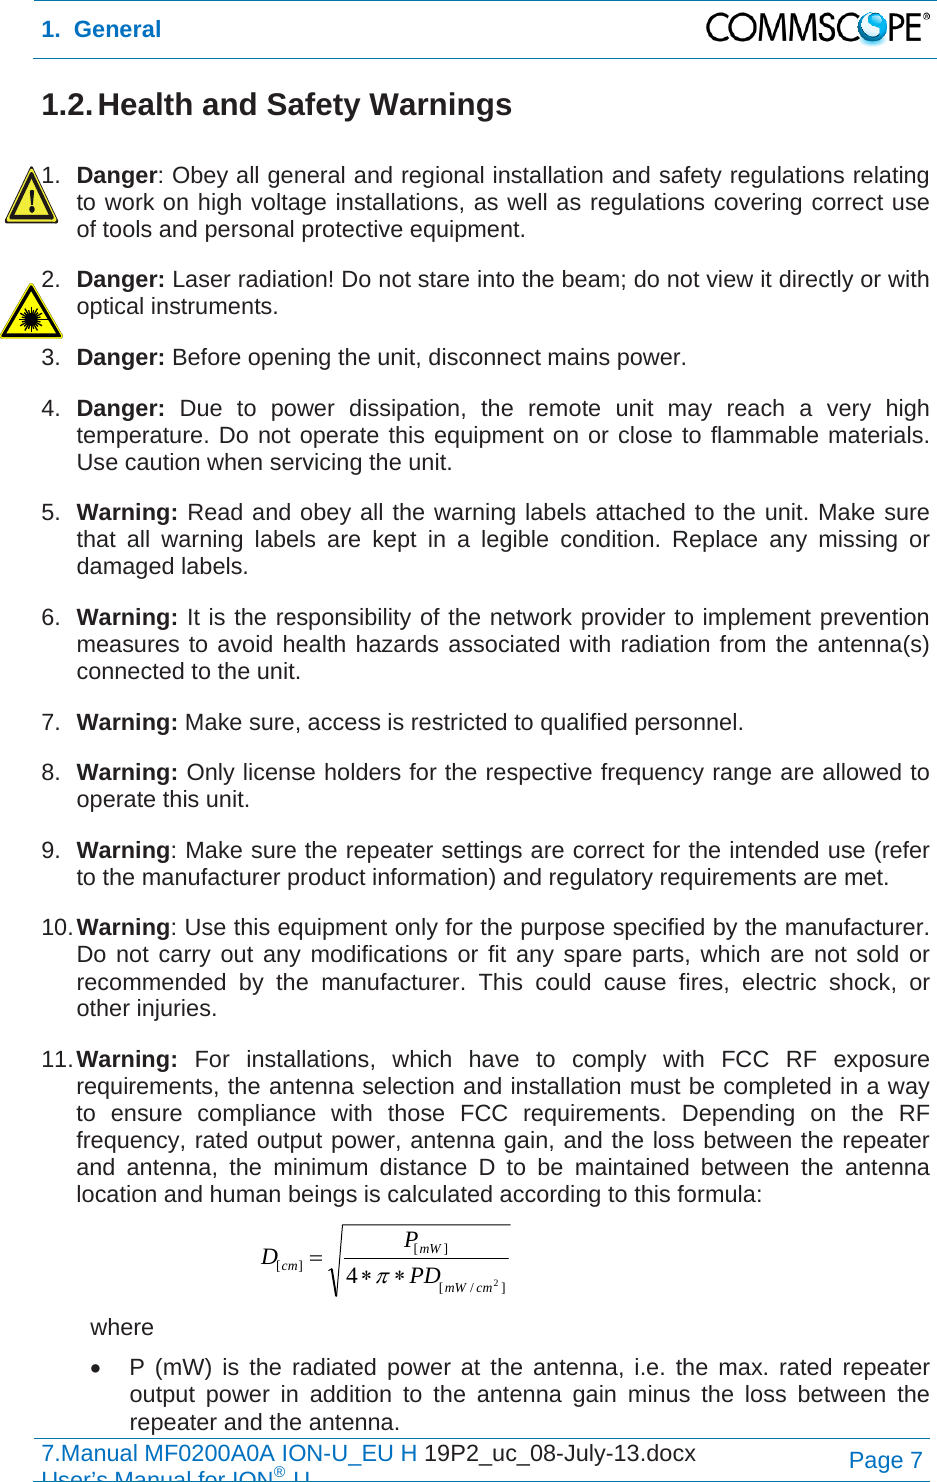 1.  General  7.Manual MF0200A0A ION-U_EU H 19P2_uc_08-July-13.docx   User’s Manual for ION®UPage 7 1.2. Health and Safety Warnings  1.  Danger: Obey all general and regional installation and safety regulations relating to work on high voltage installations, as well as regulations covering correct use of tools and personal protective equipment. 2.  Danger: Laser radiation! Do not stare into the beam; do not view it directly or with optical instruments. 3.  Danger: Before opening the unit, disconnect mains power. 4.  Danger:  Due to power dissipation, the remote unit may reach a very high temperature. Do not operate this equipment on or close to flammable materials. Use caution when servicing the unit. 5.  Warning: Read and obey all the warning labels attached to the unit. Make sure that all warning labels are kept in a legible condition. Replace any missing or damaged labels. 6.  Warning: It is the responsibility of the network provider to implement prevention measures to avoid health hazards associated with radiation from the antenna(s) connected to the unit. 7.  Warning: Make sure, access is restricted to qualified personnel. 8.  Warning: Only license holders for the respective frequency range are allowed to operate this unit. 9.  Warning: Make sure the repeater settings are correct for the intended use (refer to the manufacturer product information) and regulatory requirements are met. 10. Warning: Use this equipment only for the purpose specified by the manufacturer. Do not carry out any modifications or fit any spare parts, which are not sold or recommended by the manufacturer. This could cause fires, electric shock, or other injuries. 11. Warning: For installations, which have to comply with FCC RF exposure requirements, the antenna selection and installation must be completed in a way to ensure compliance with those FCC requirements. Depending on the RF frequency, rated output power, antenna gain, and the loss between the repeater and antenna, the minimum distance D to be maintained between the antenna location and human beings is calculated according to this formula:  ]/[][][24cmmWmWcmPDPD  where   P (mW) is the radiated power at the antenna, i.e. the max. rated repeater output power in addition to the antenna gain minus the loss between the repeater and the antenna. 